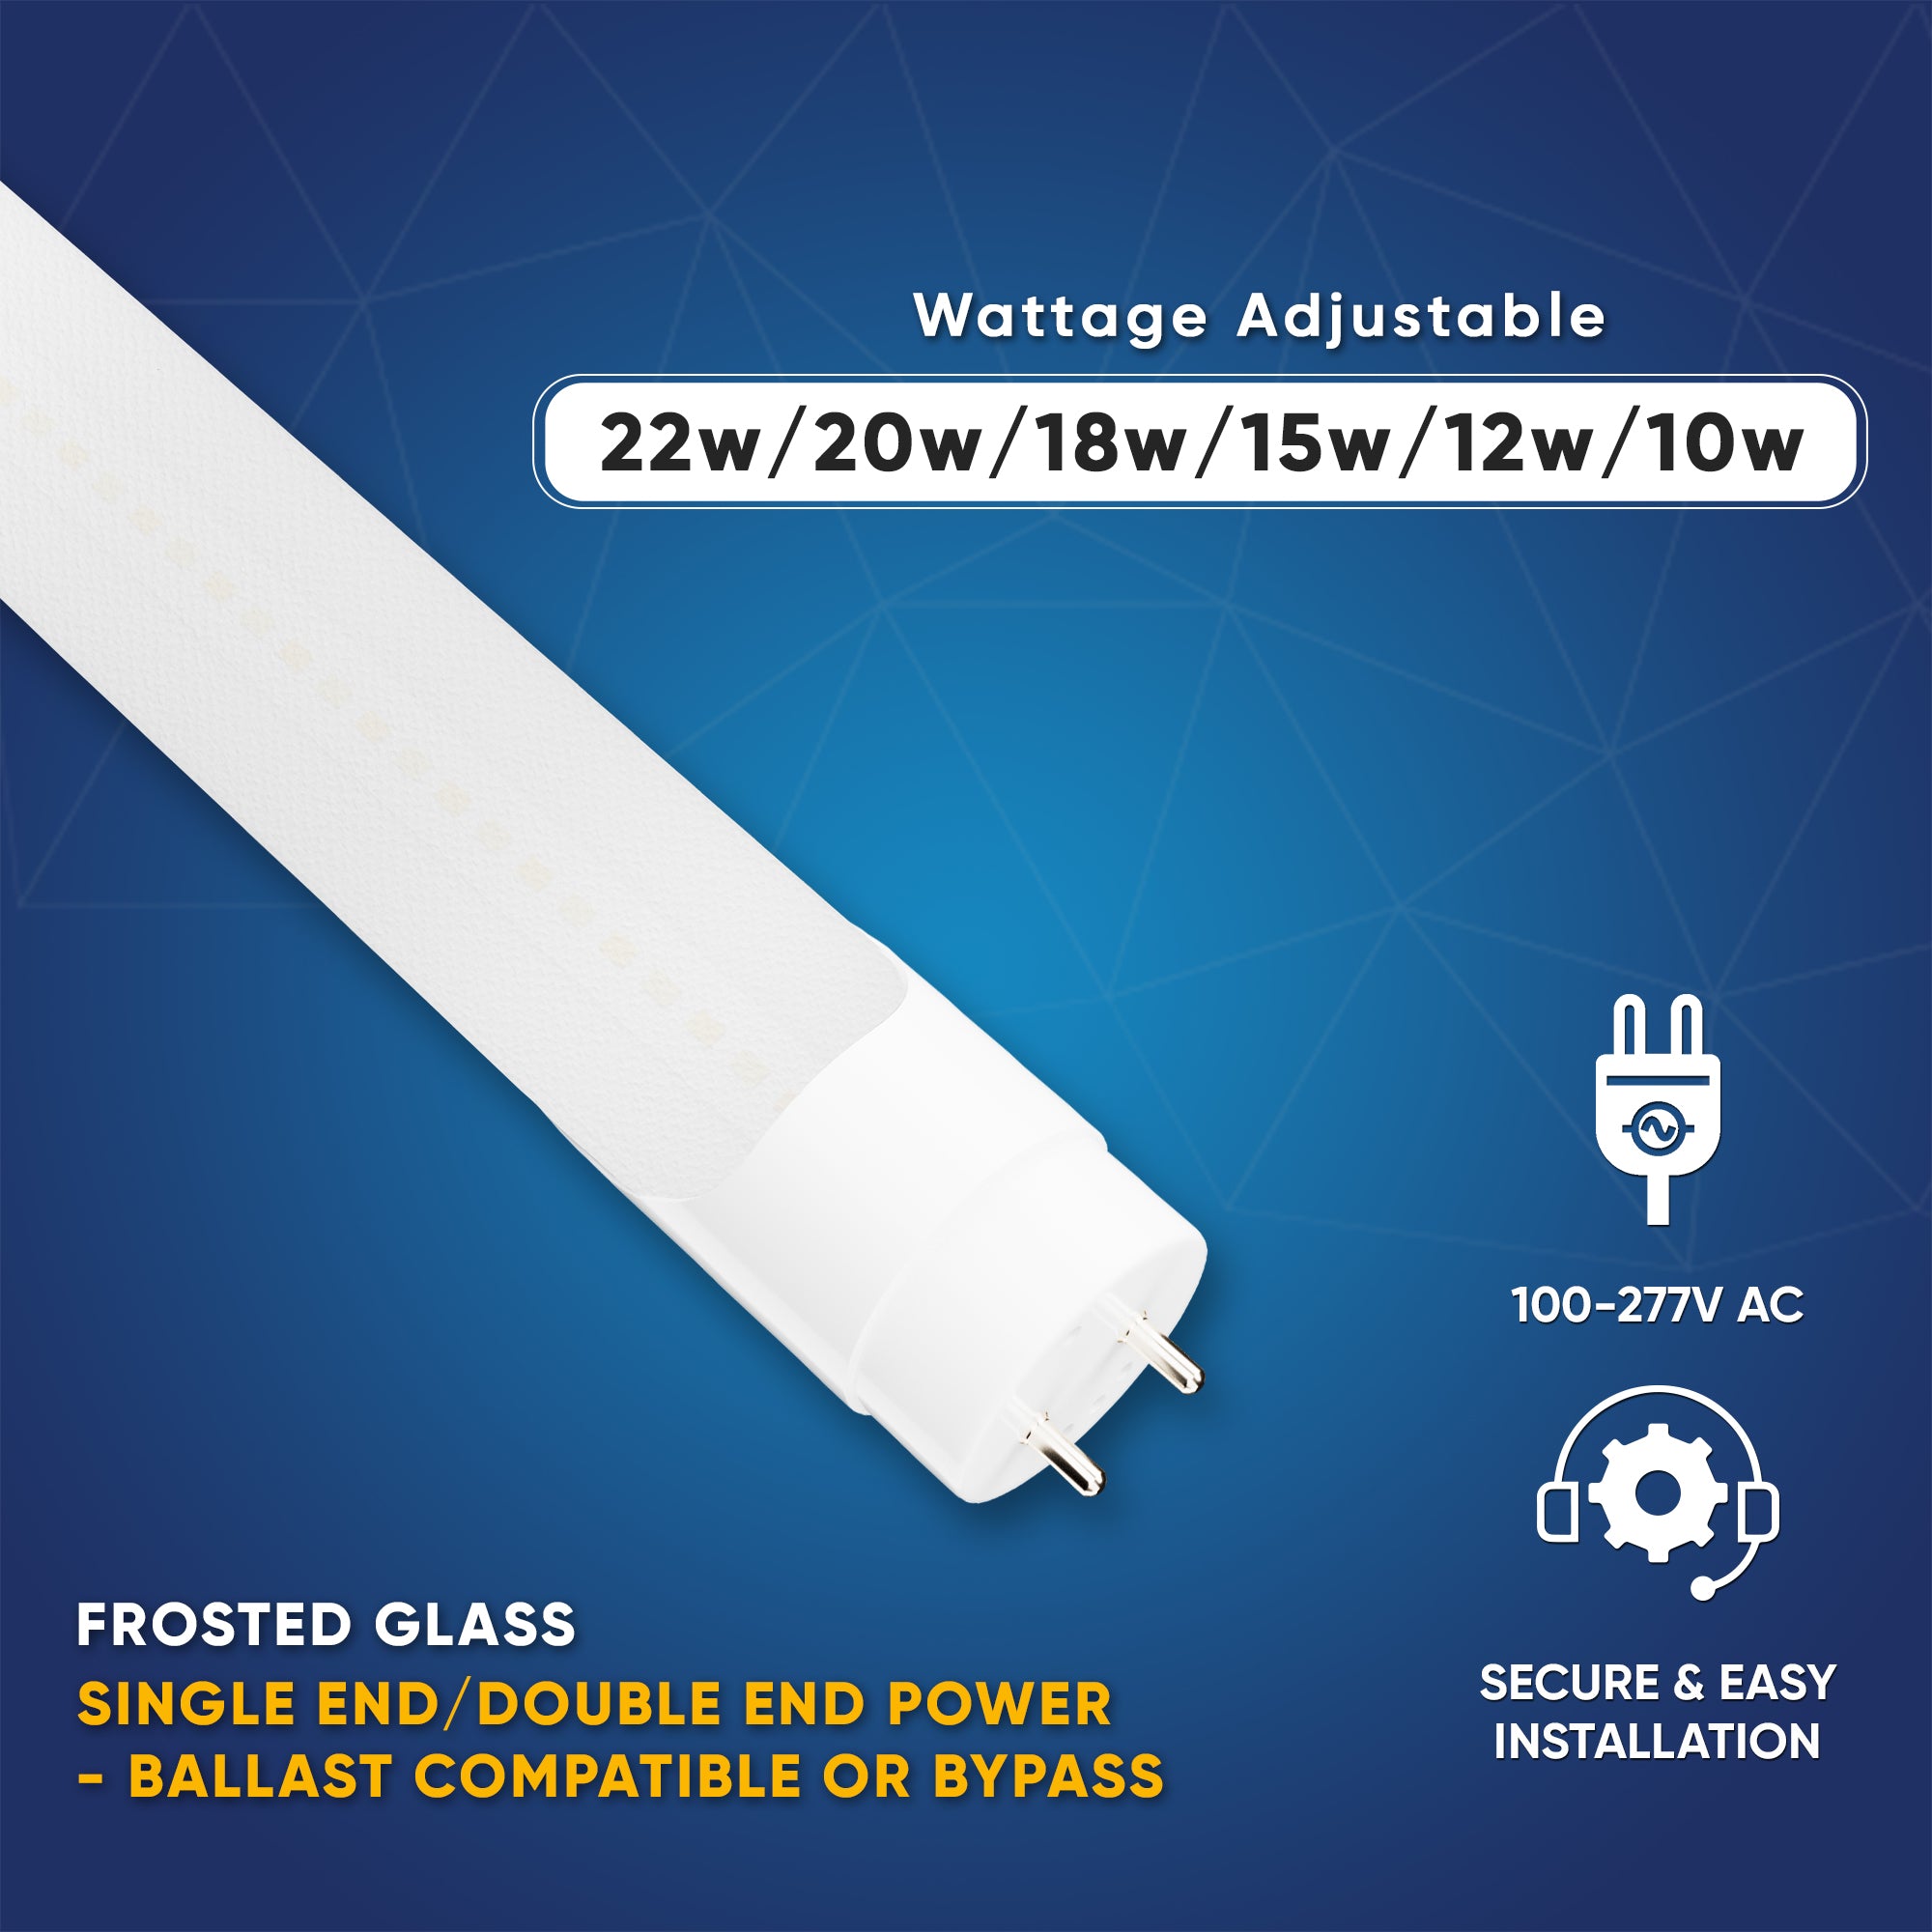 Hybrid T8 4ft LED Tube/Bulb - 22w/20w/18w/15w/ 12w/10w Wattage Adjustable, 130lm/w, 3000k/3500k/4000k/5000k/ 6000k/6500k CCT Changeable, Frosted, Base G13, Single End/Double End Power - Ballast Compatible or Bypass